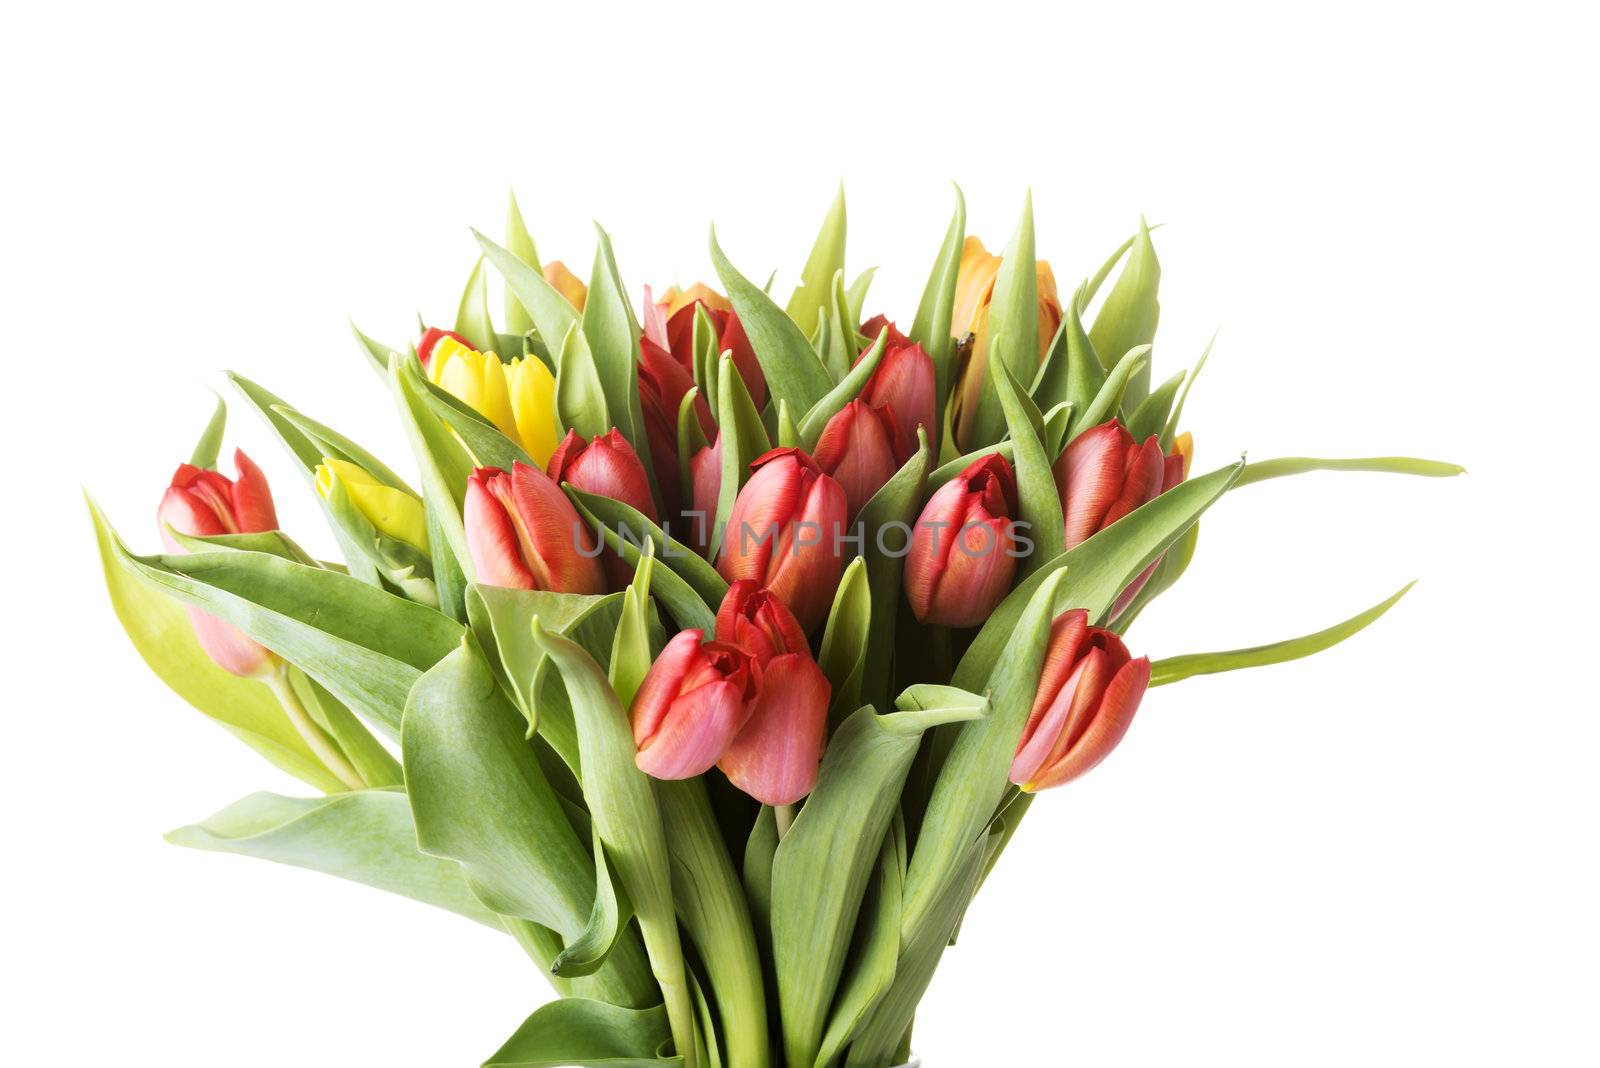 Tulips by BDS